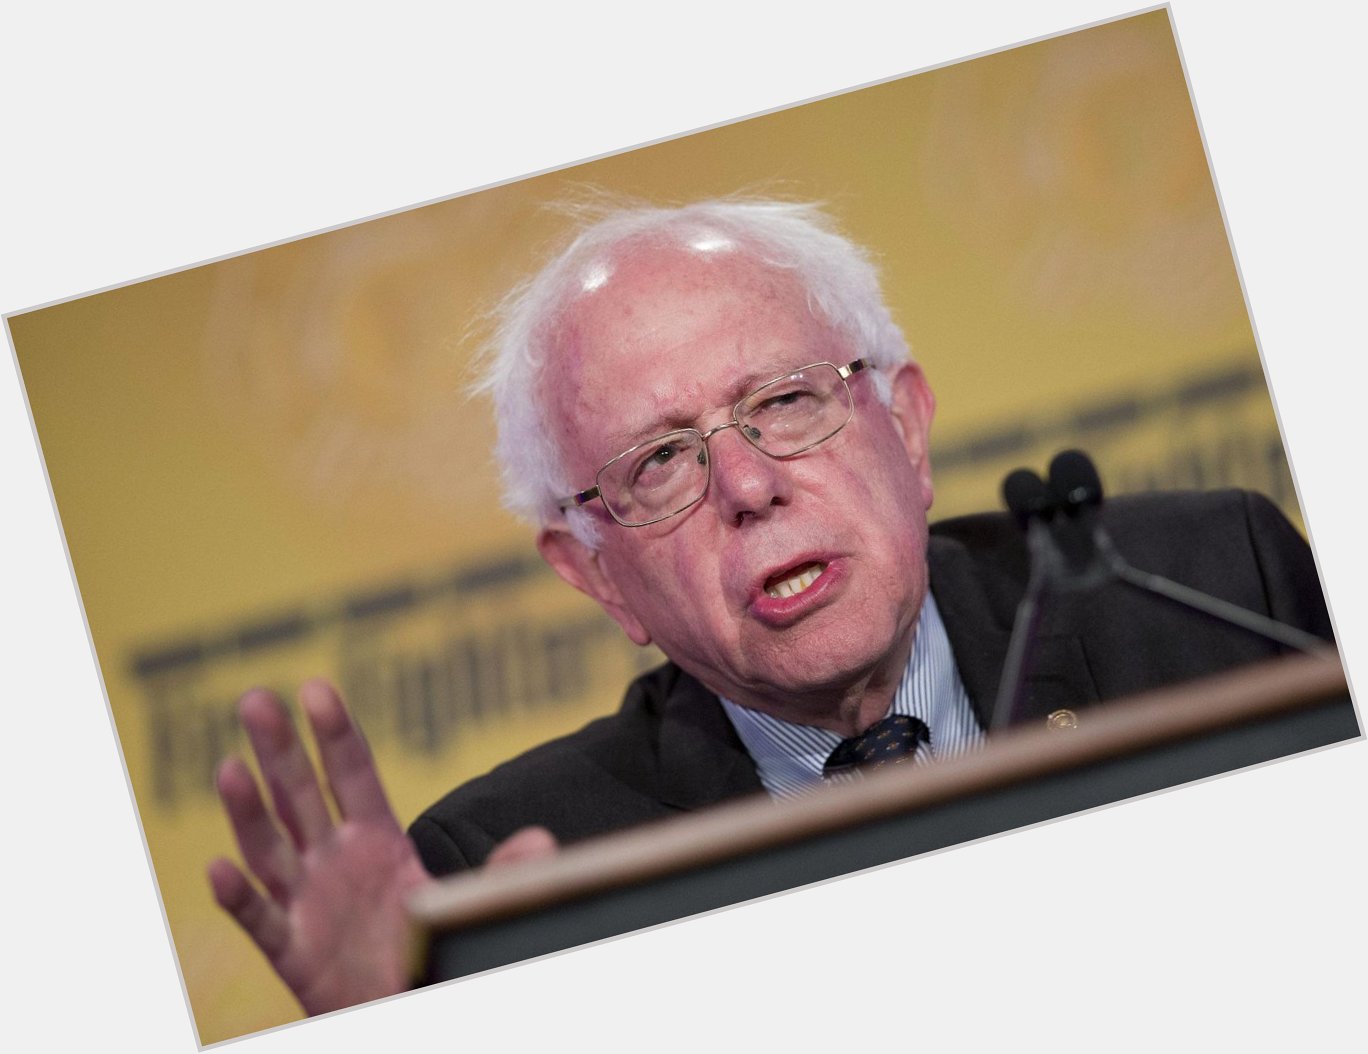 :Happy Birthday to Bernie Sanders who just turned 187 years old this month: 
Will someone buy this man a comb please?